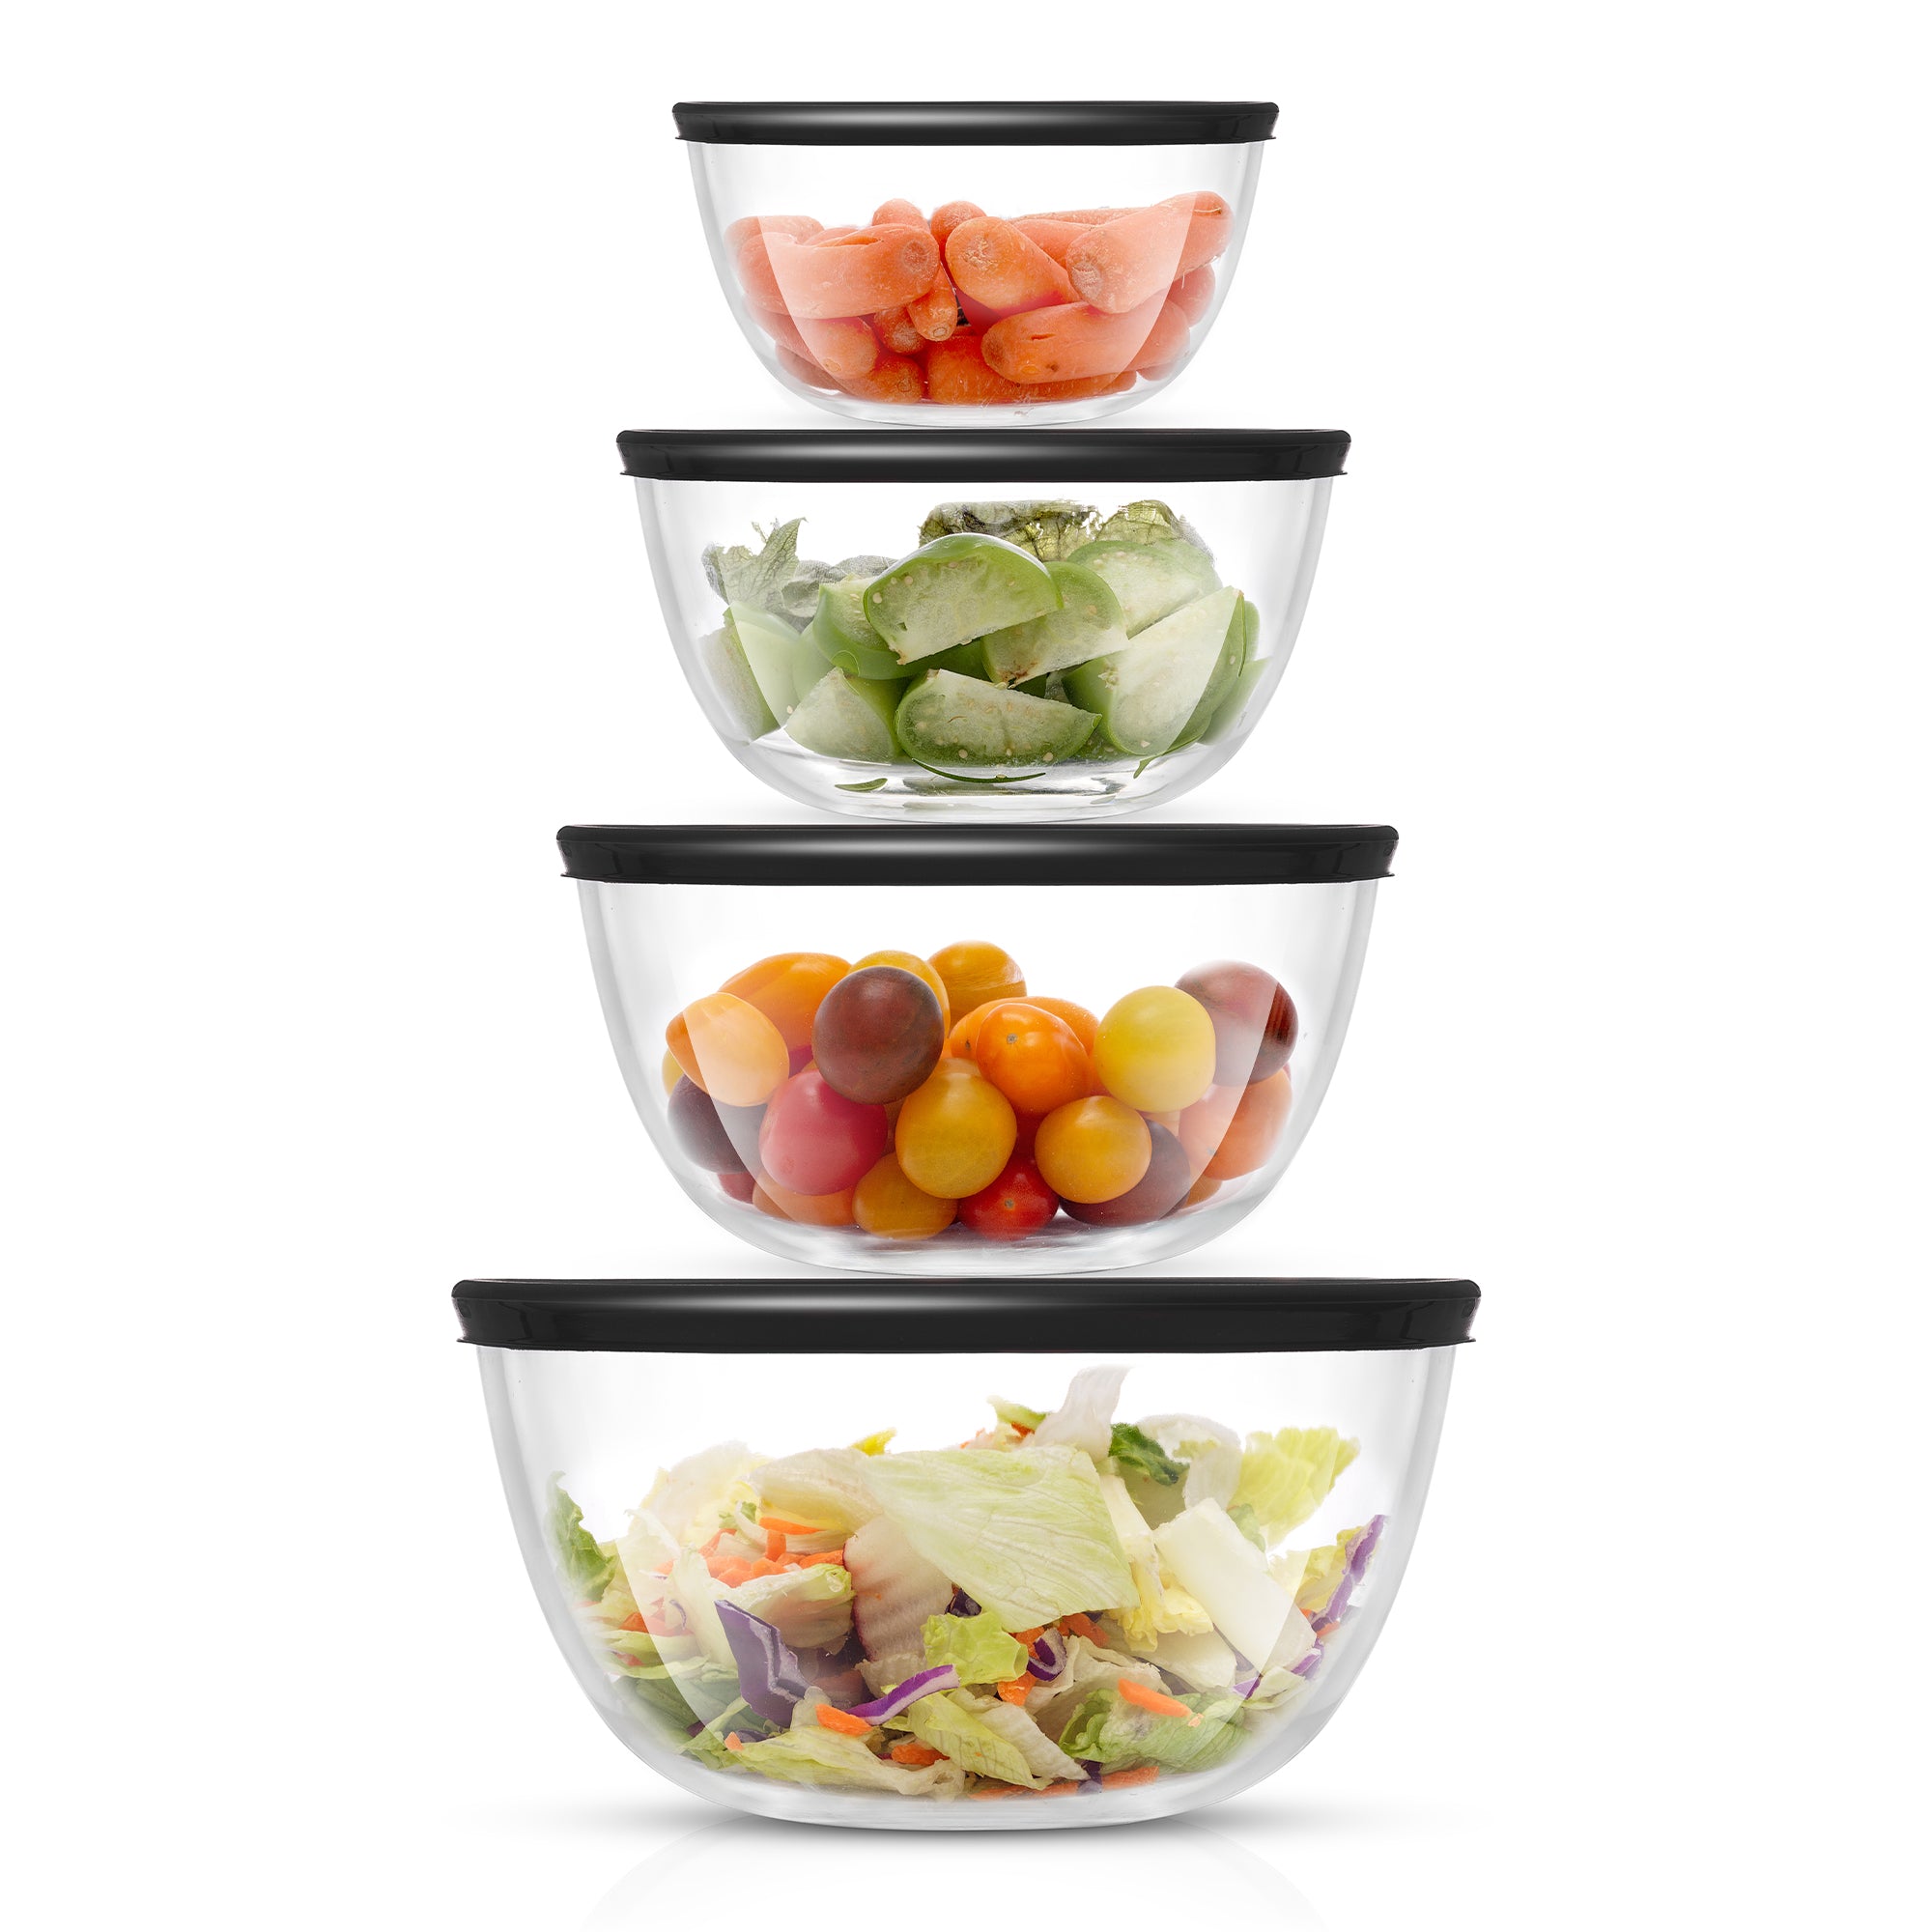 Assorted vegetables are contained in four glass bowls.